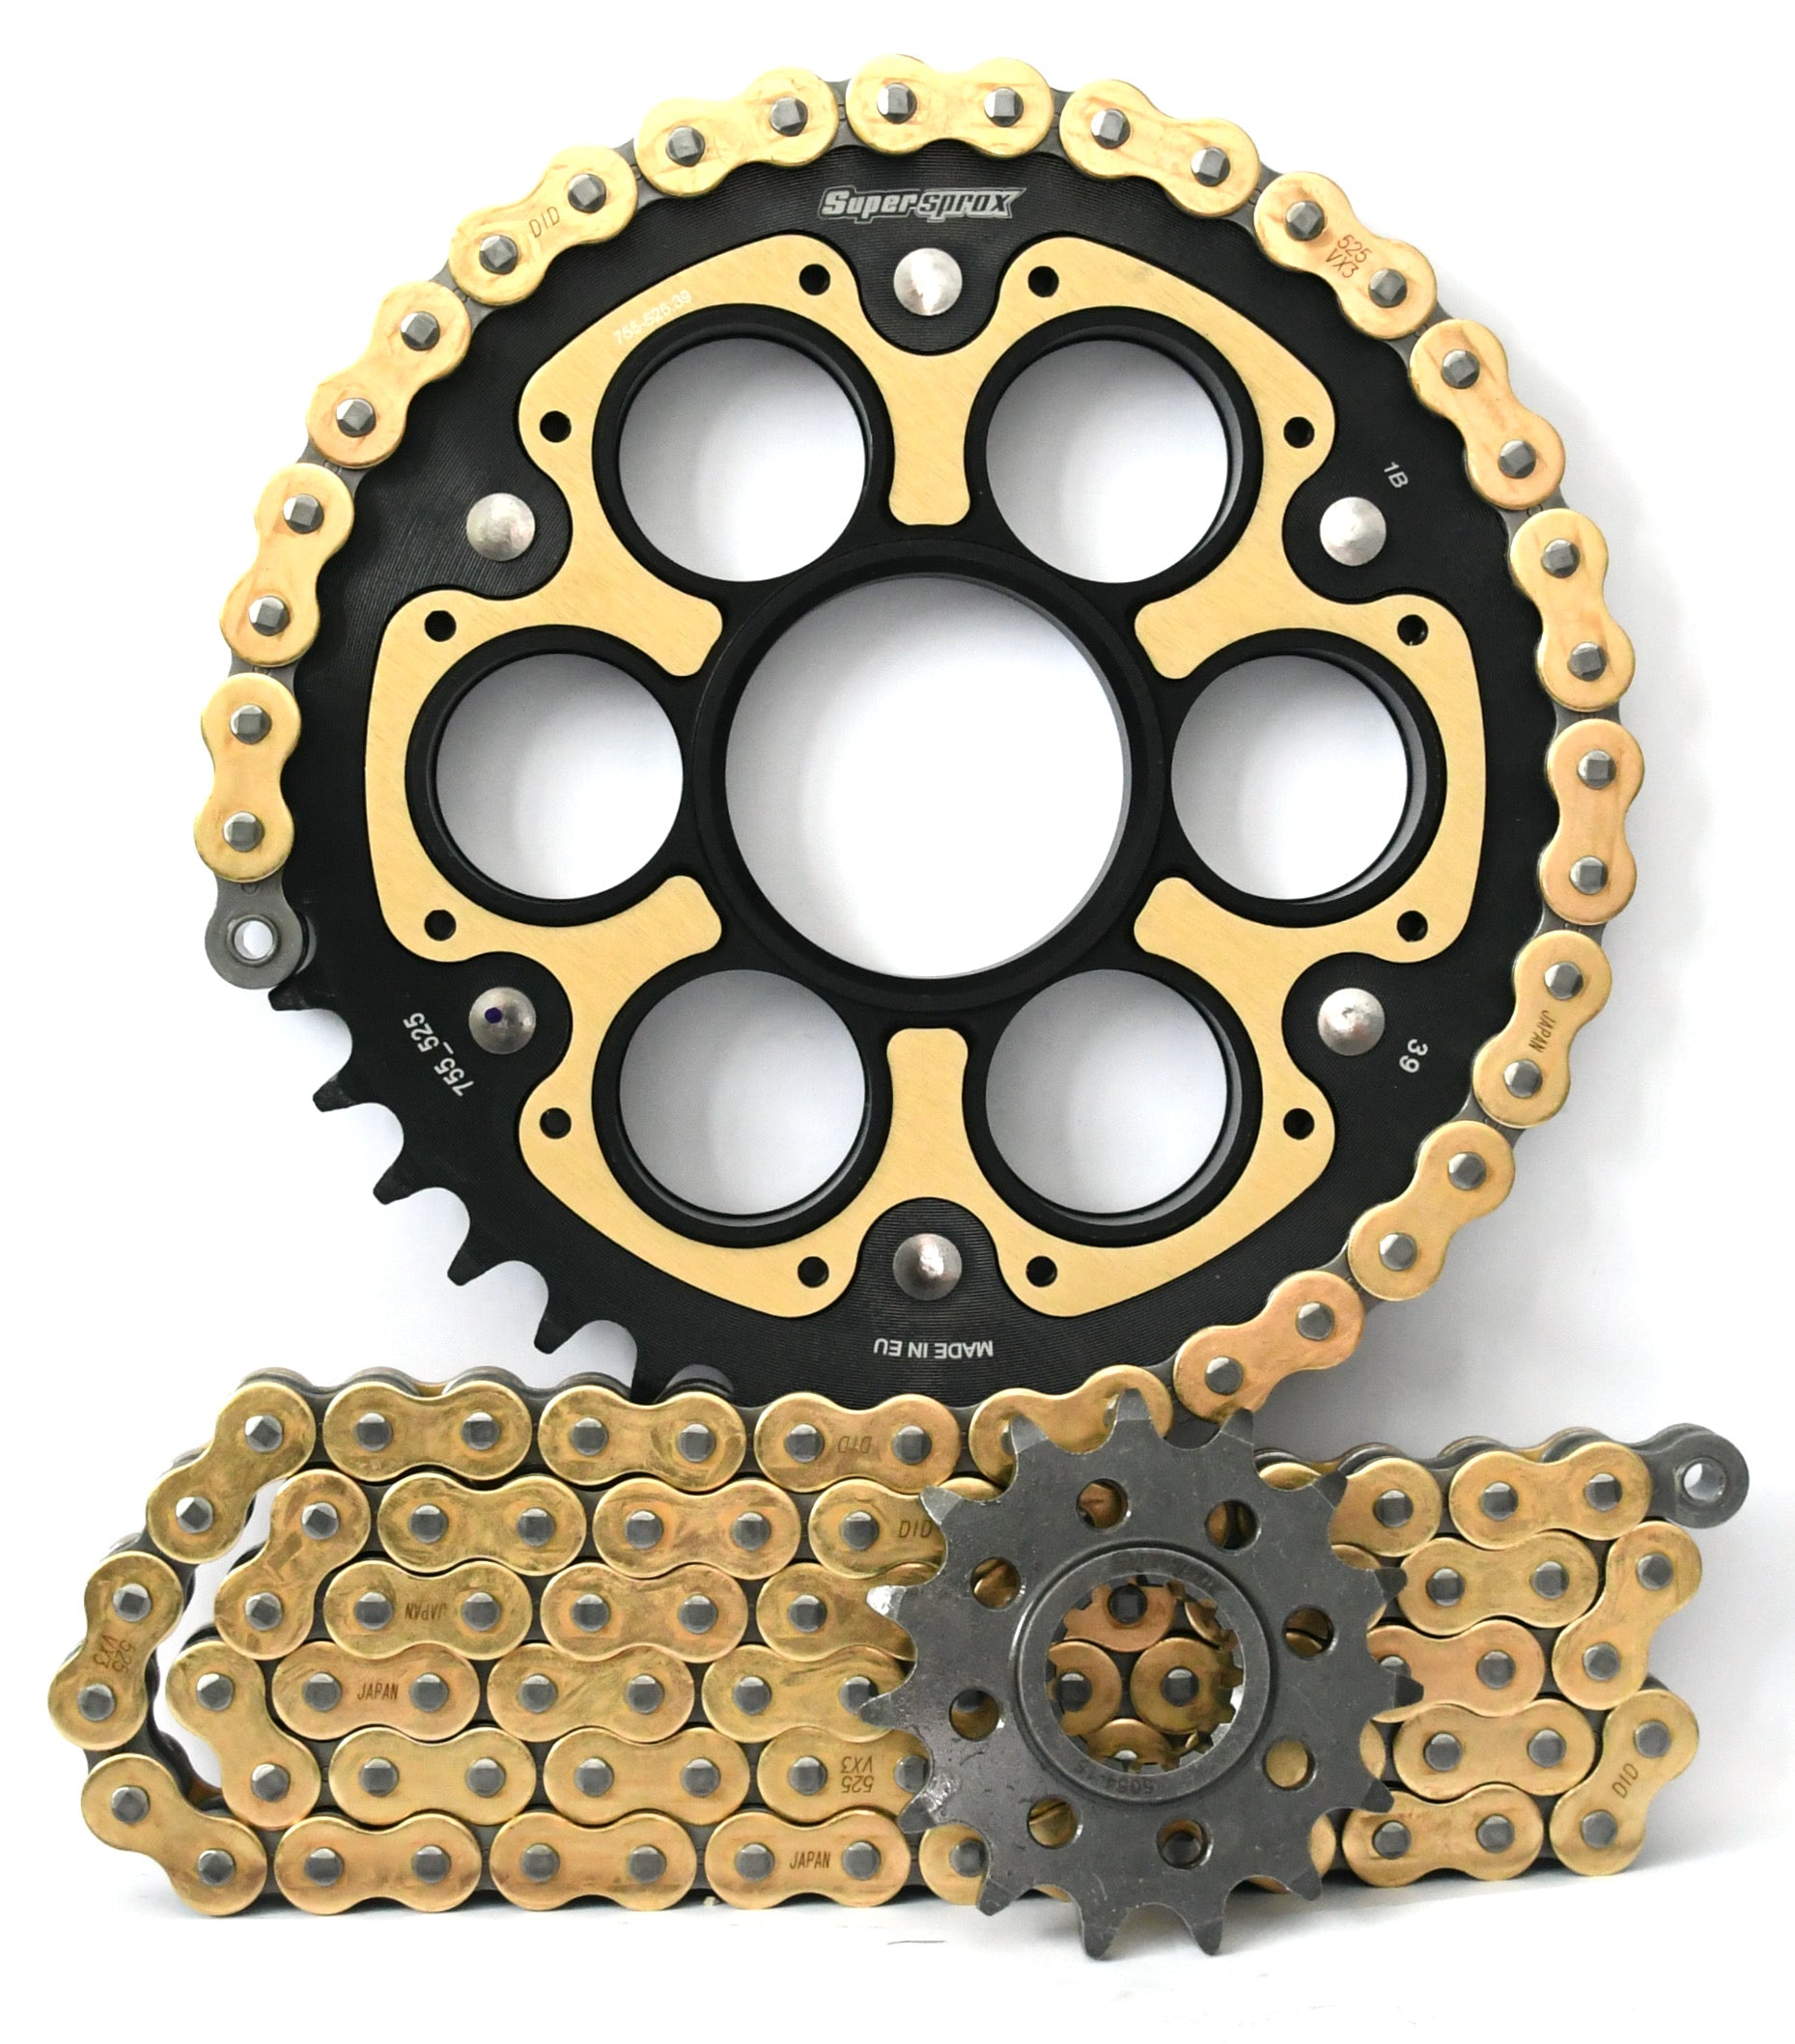 Supersprox Chain & Sprocket Kit for Ducati Panigale 1199 and 1299 - Standard Gearing - 0